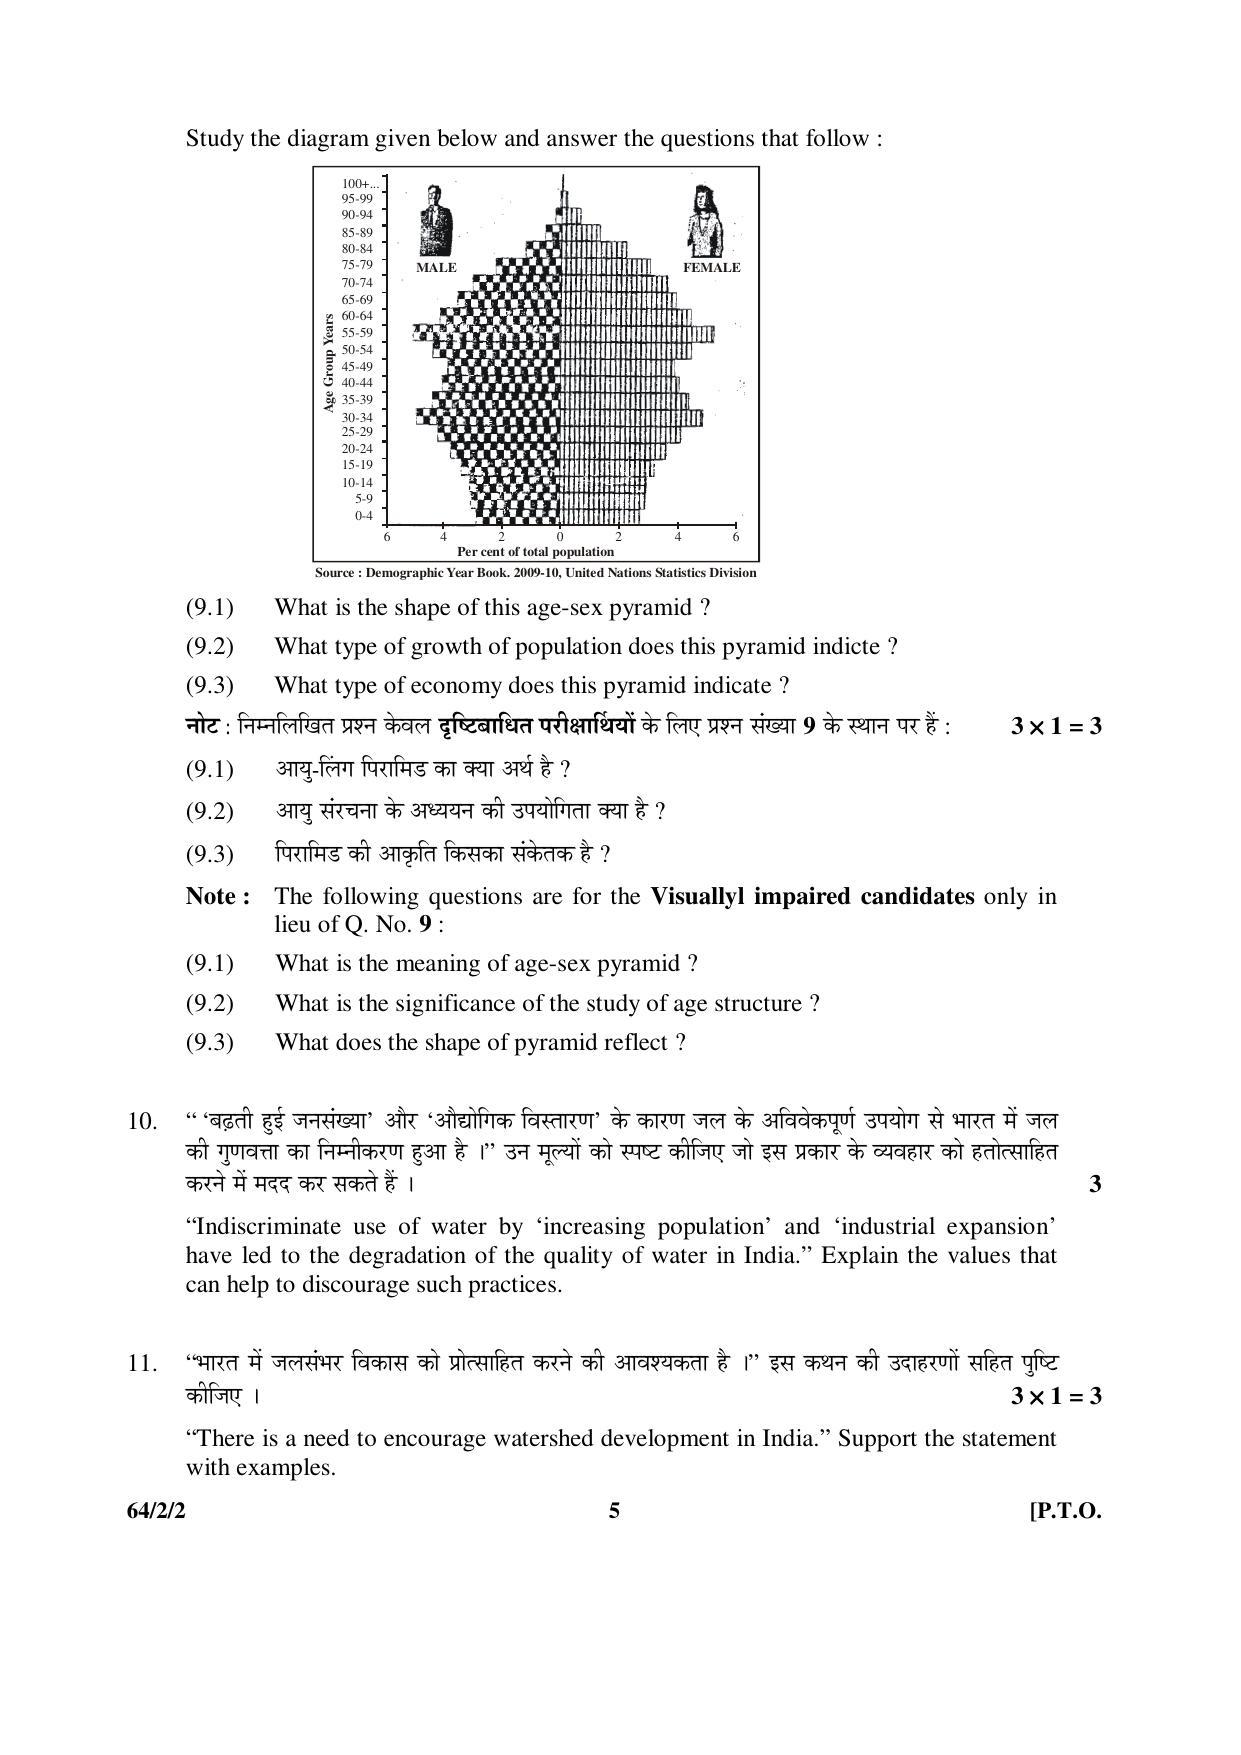 CBSE Class 12 64-2-2 Geography 2016 Question Paper - Page 5